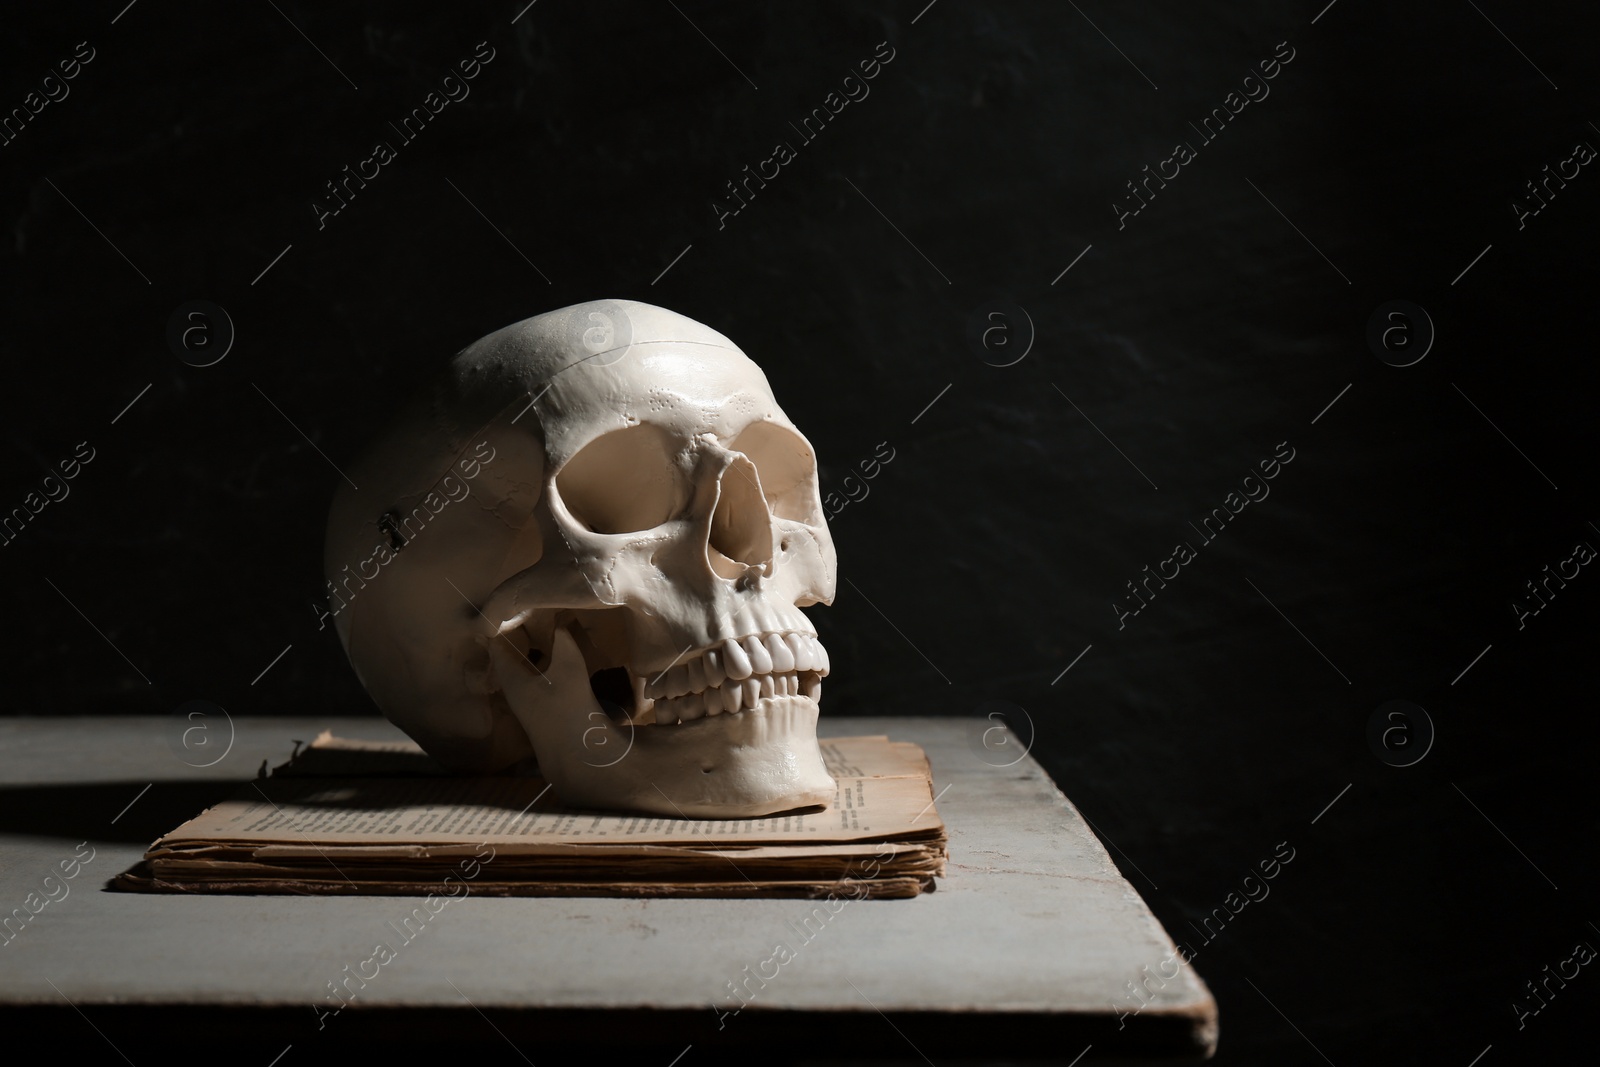 Photo of Human skull and old book on table against black background, space for text